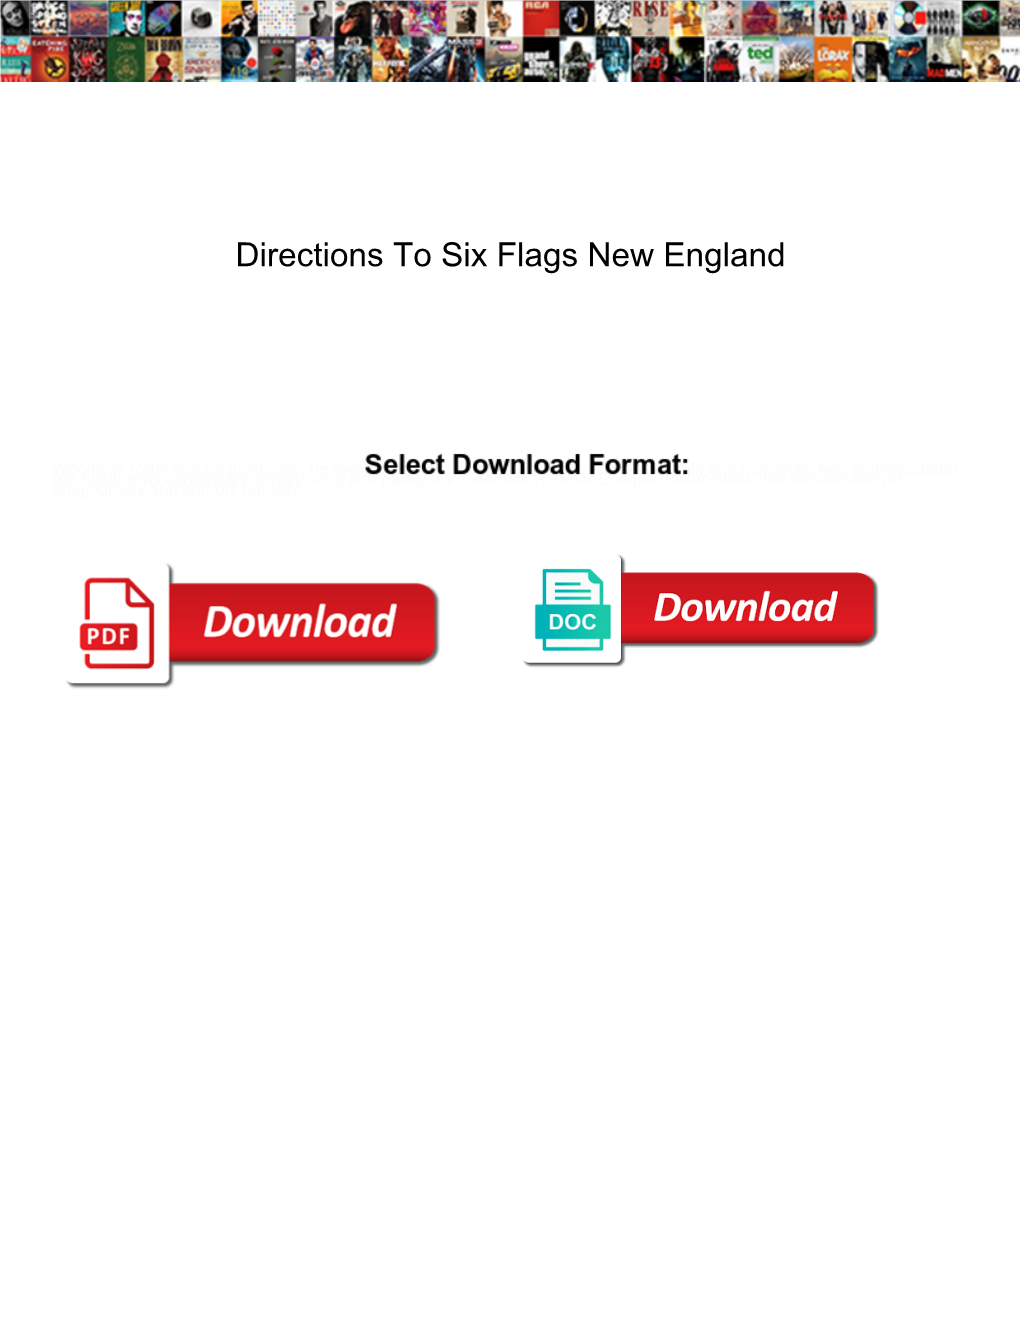 Directions to Six Flags New England